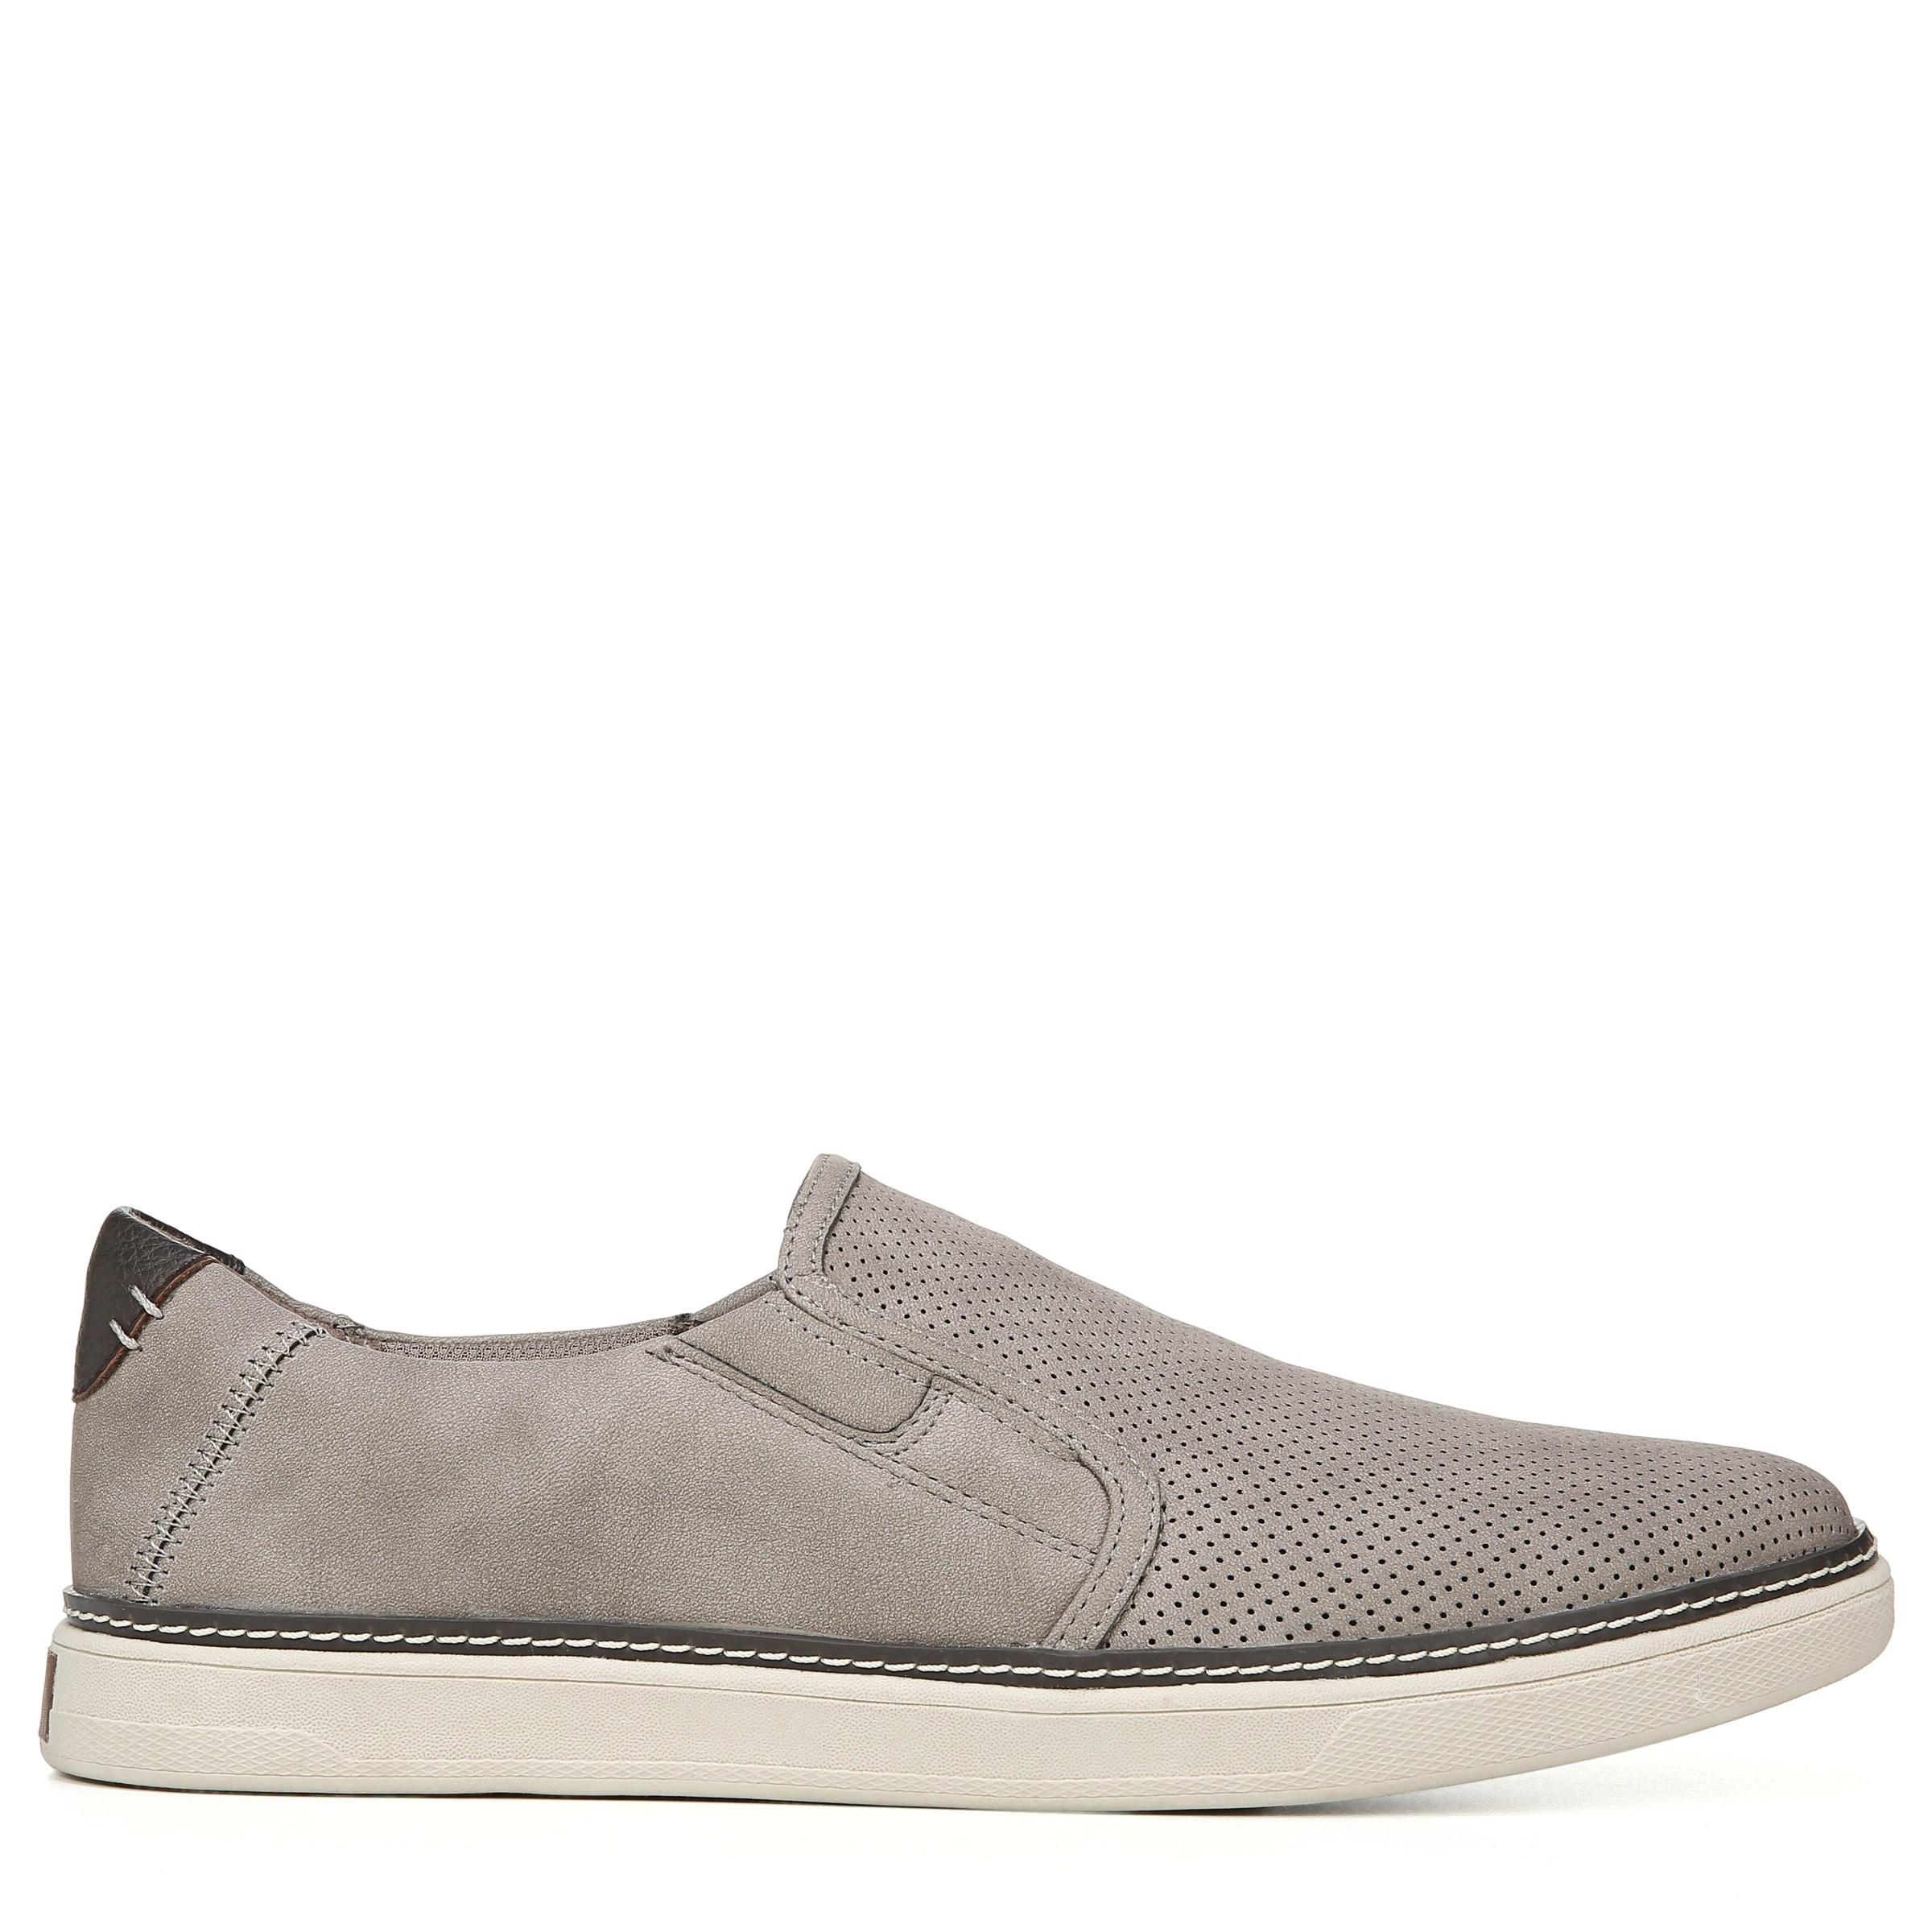 Dr. Scholls Leather Eager Slip On Sneakers in Taupe (Gray) for Men - Lyst